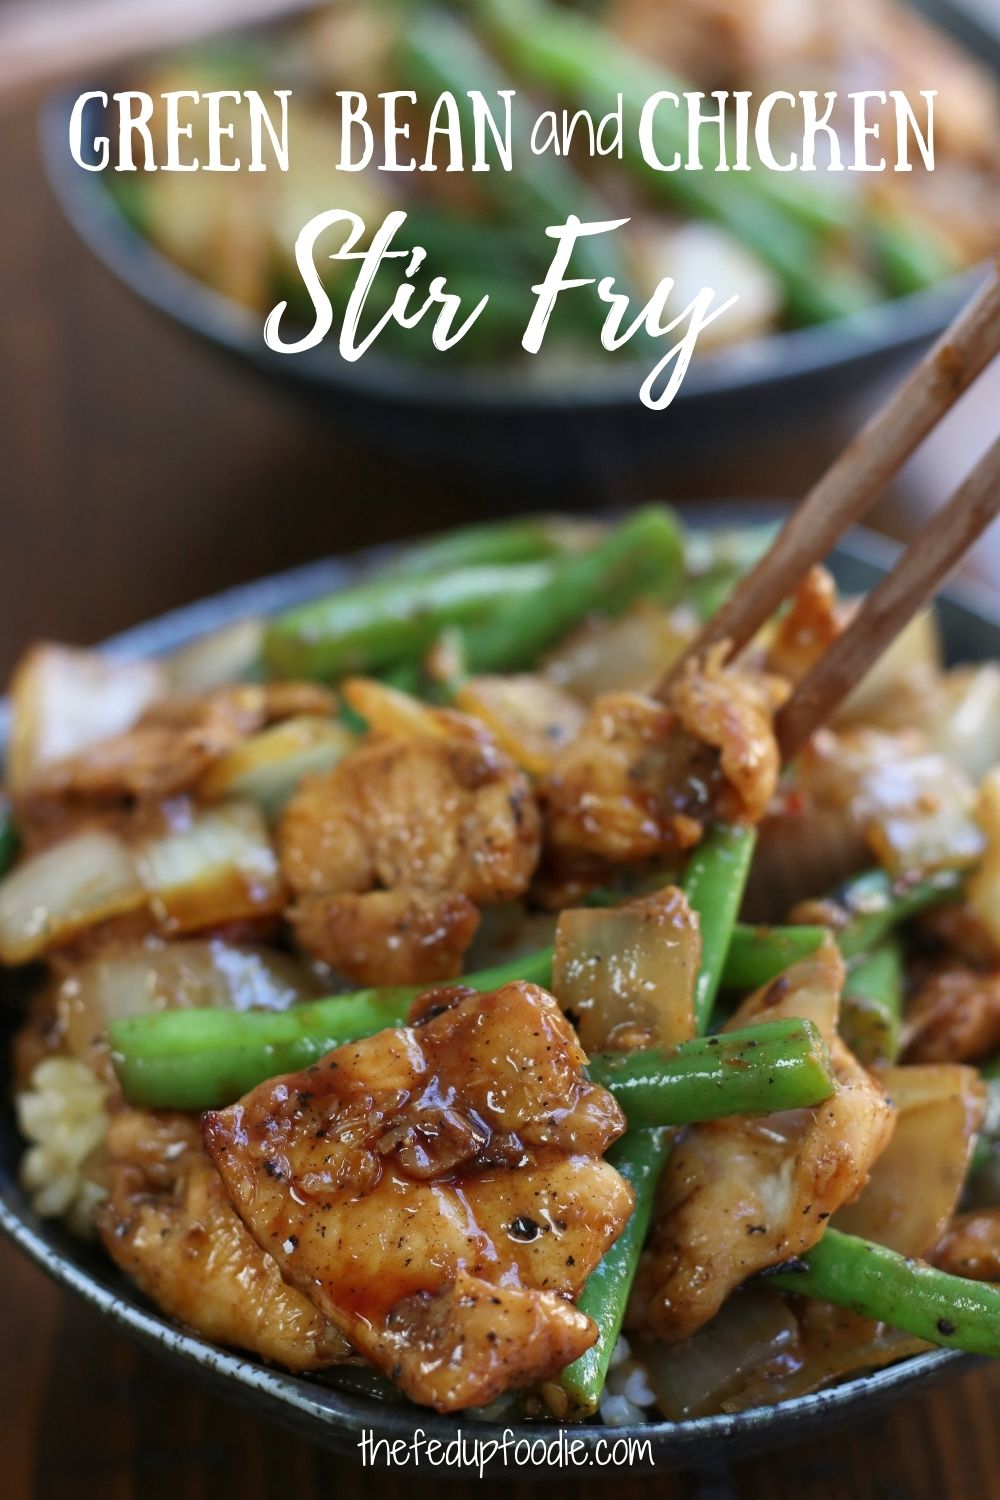 Green Bean Stir Fry is an easy 30 minute meal that is healthy and delicious. This recipe uses chicken breasts, a homemade stir fry sauce and includes a break down of stir frying cooking method for home cooks. 
#GreenBeanStirFry #GreenBeanStirFryChicken #GreenBeanAndChickenRecipes #EasyChickenStirFryWithVegetables #StirFryChickenAndVeggies #ChickenGreenBeanStirFry #ChickenAndGreenBeanStirFryHealthy 